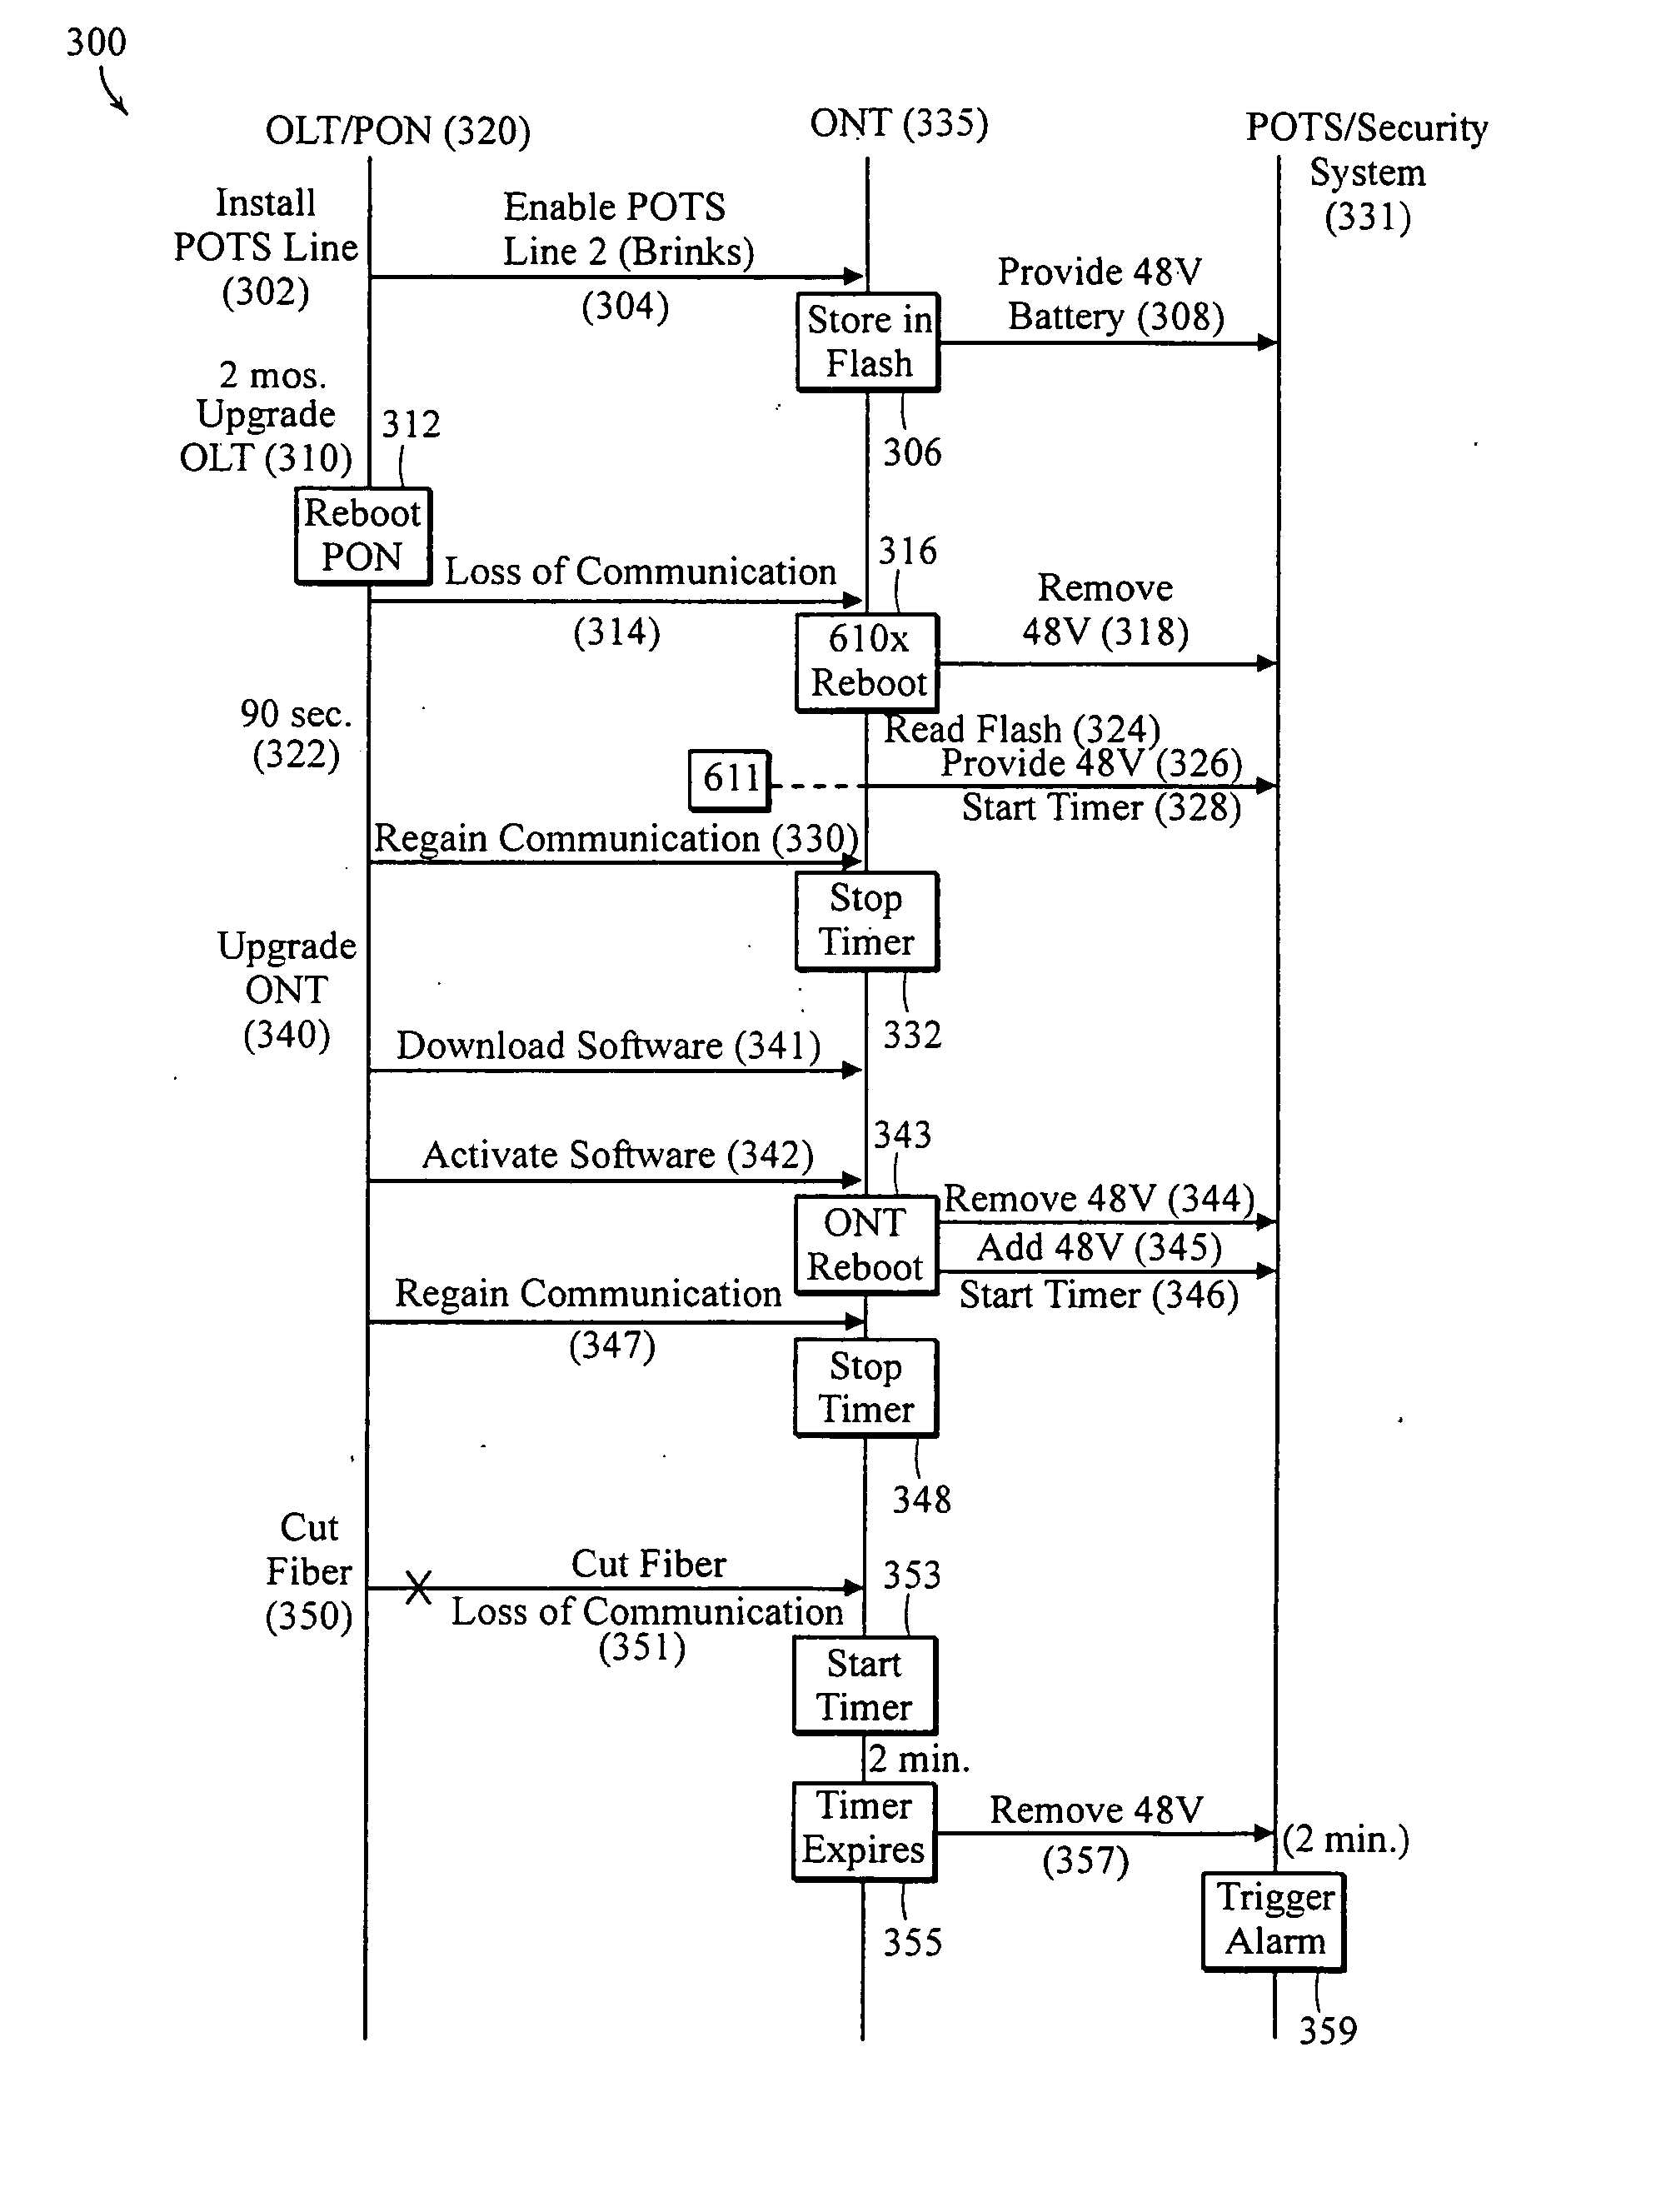 Apparatus and method of managing POTS lines in a PON network